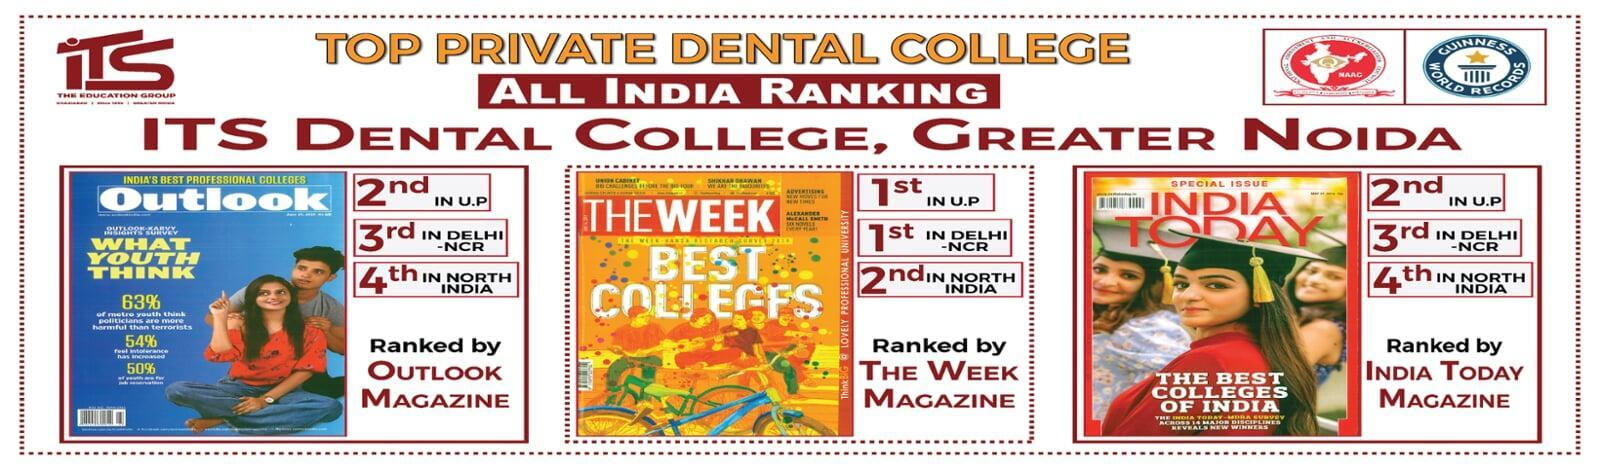 Top Private Dental College ITS